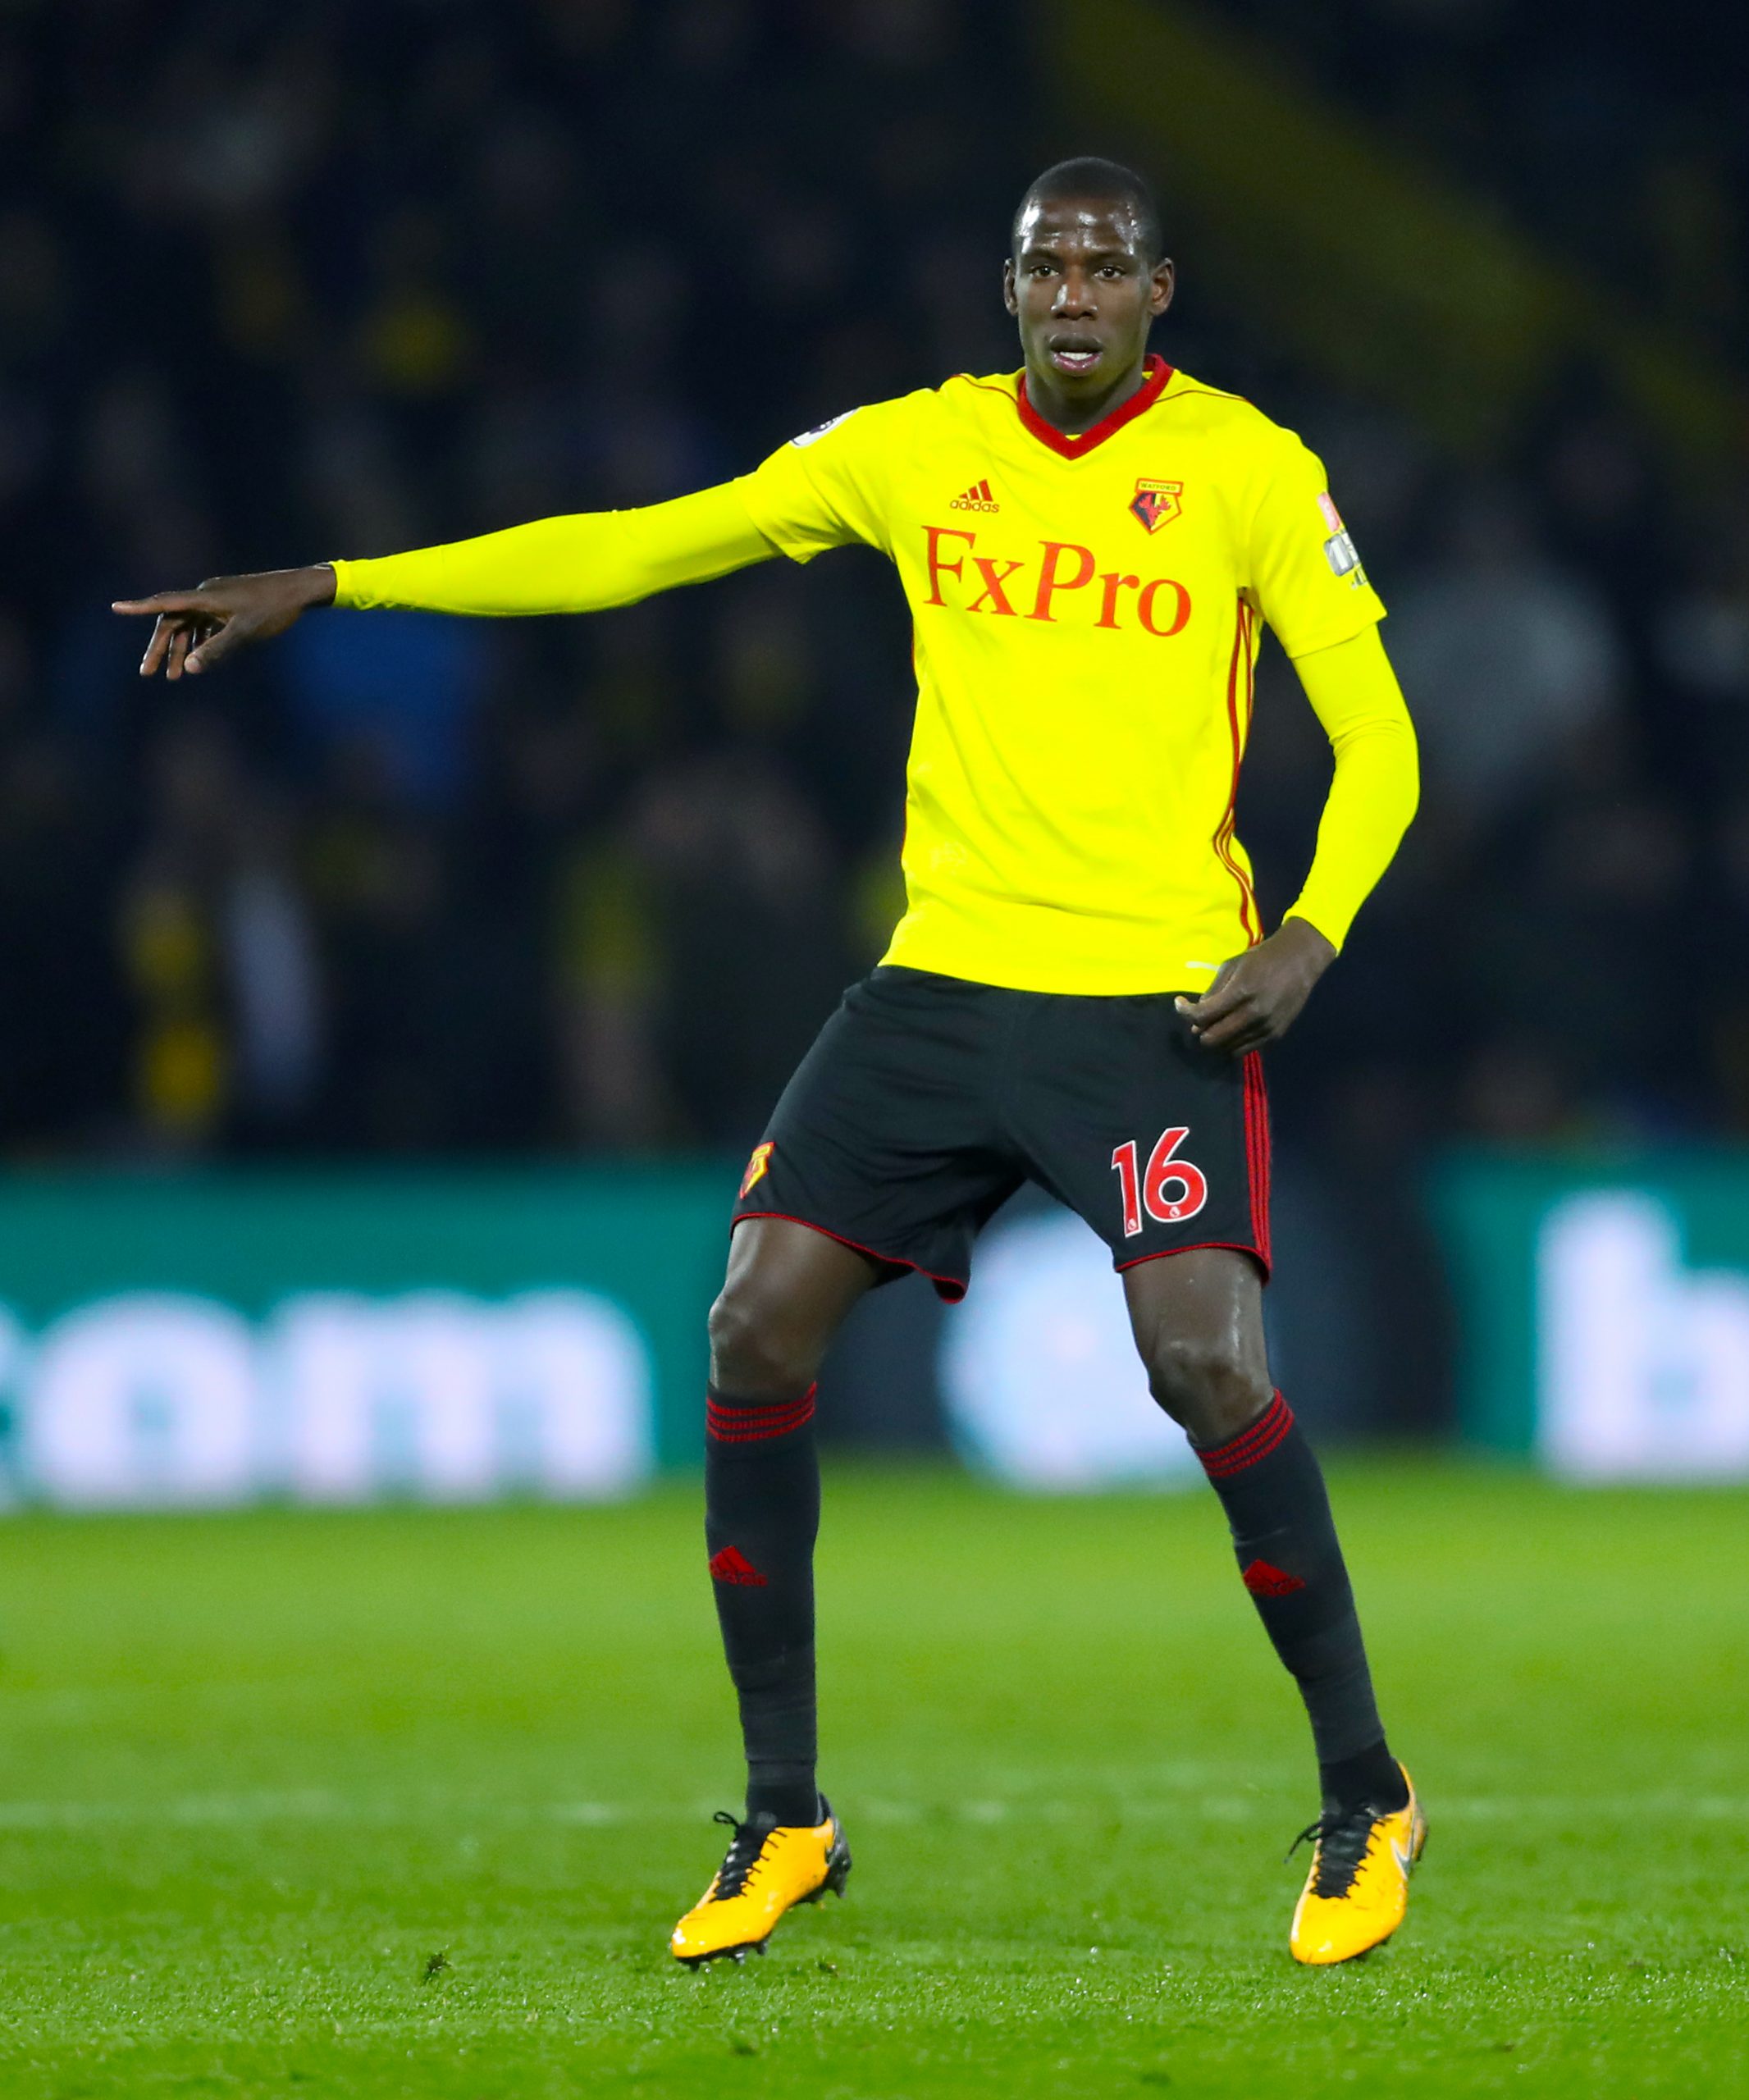 How Good is Watford's Abdoulaye Doucouré?